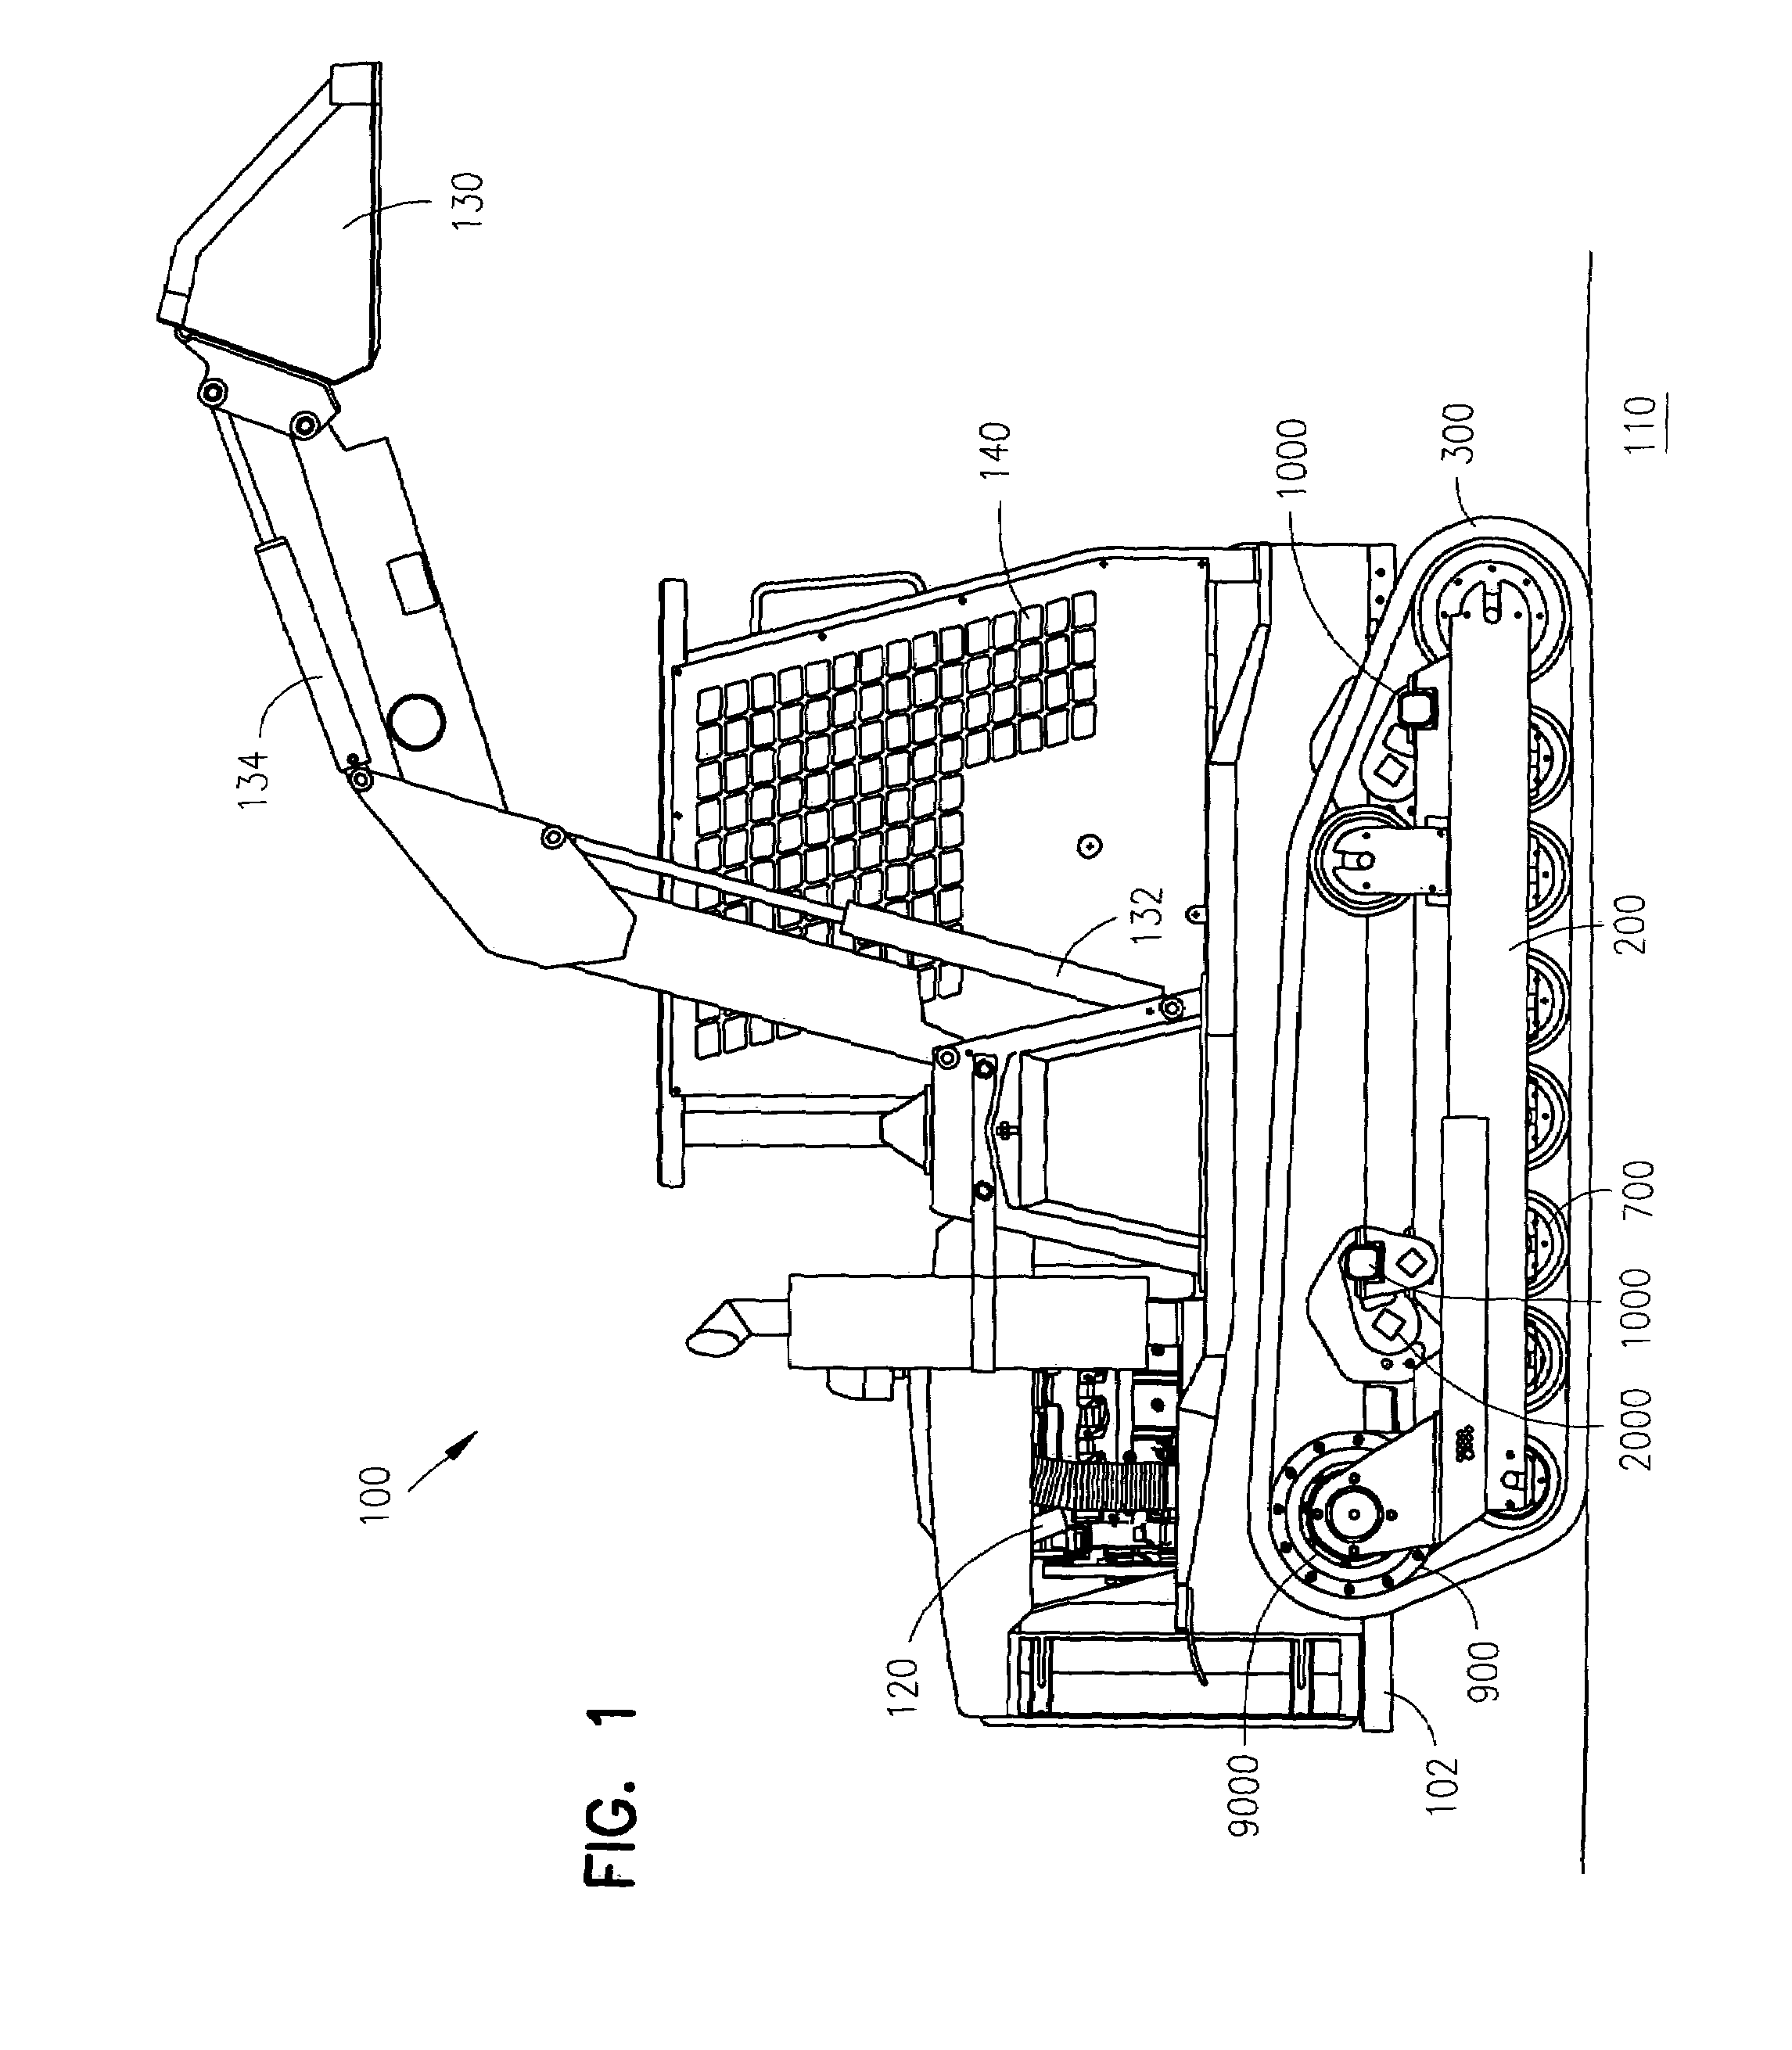 Track and drive mechanism for a vehicle